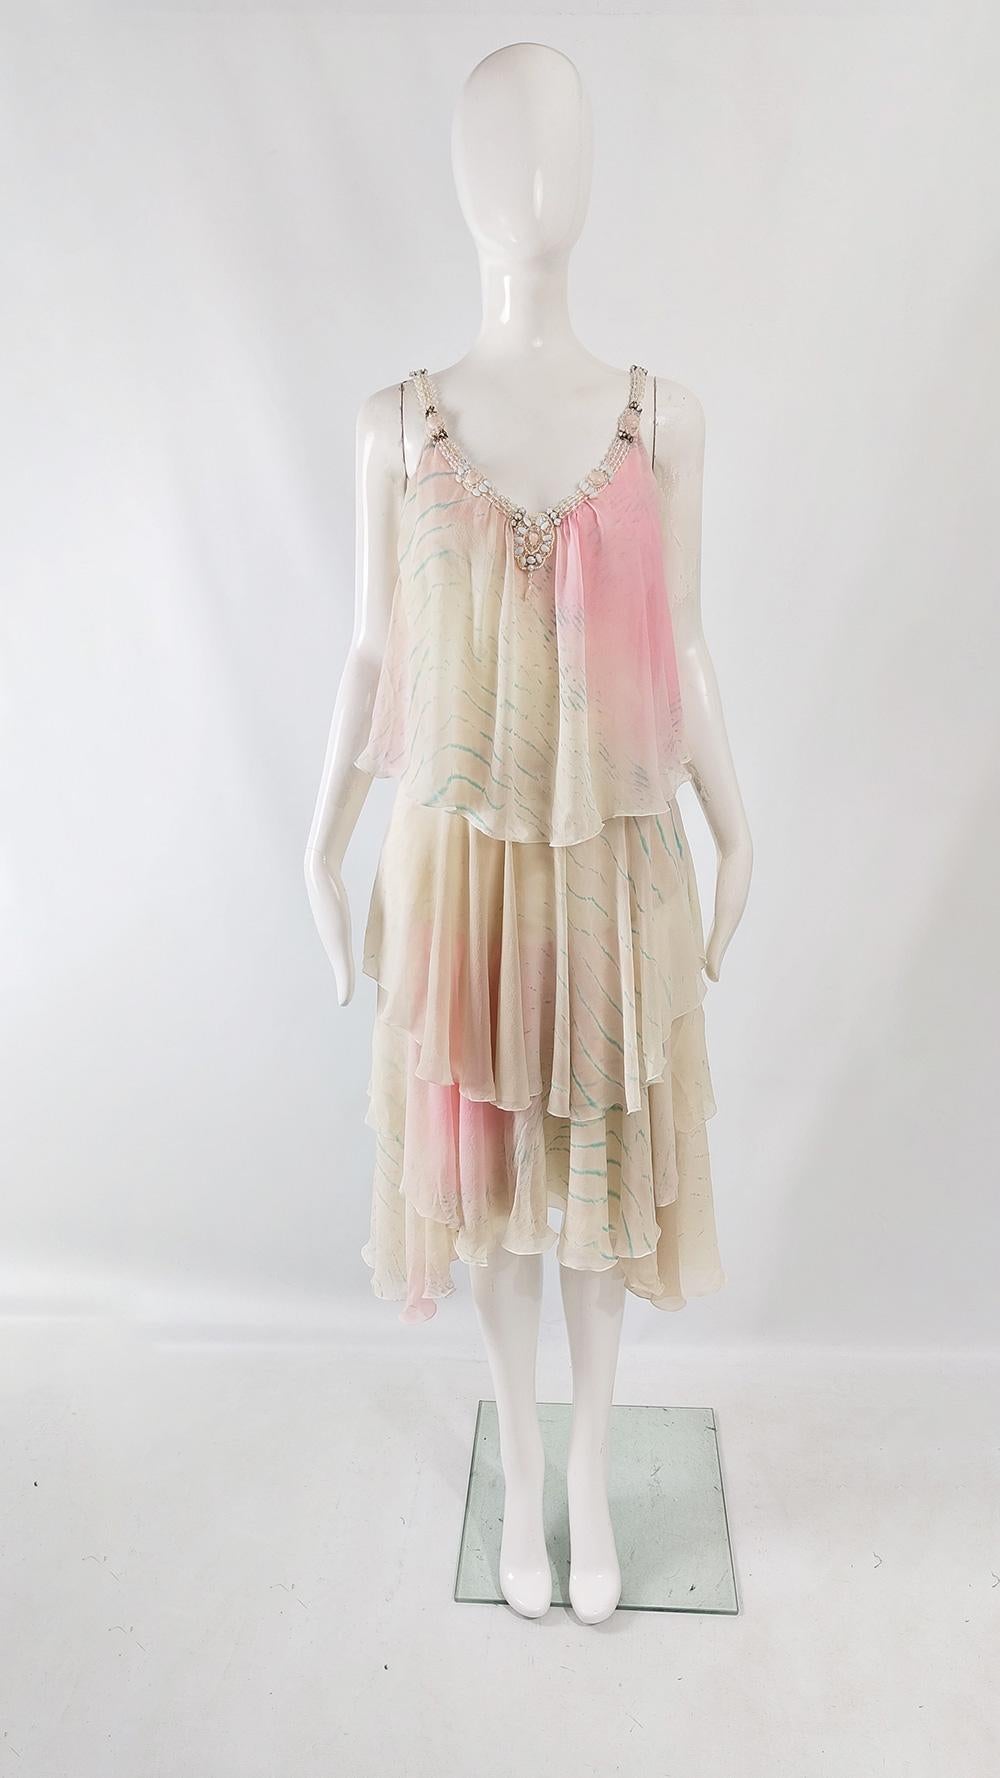 An incredibly pretty vintage womens dress from the 2000s by luxury Italian fashion house, Iceberg. Made in Italy, from tiers of cream, pink and blue ombré silk chiffon which give an ethereal look. It has statement beading around the neckline -